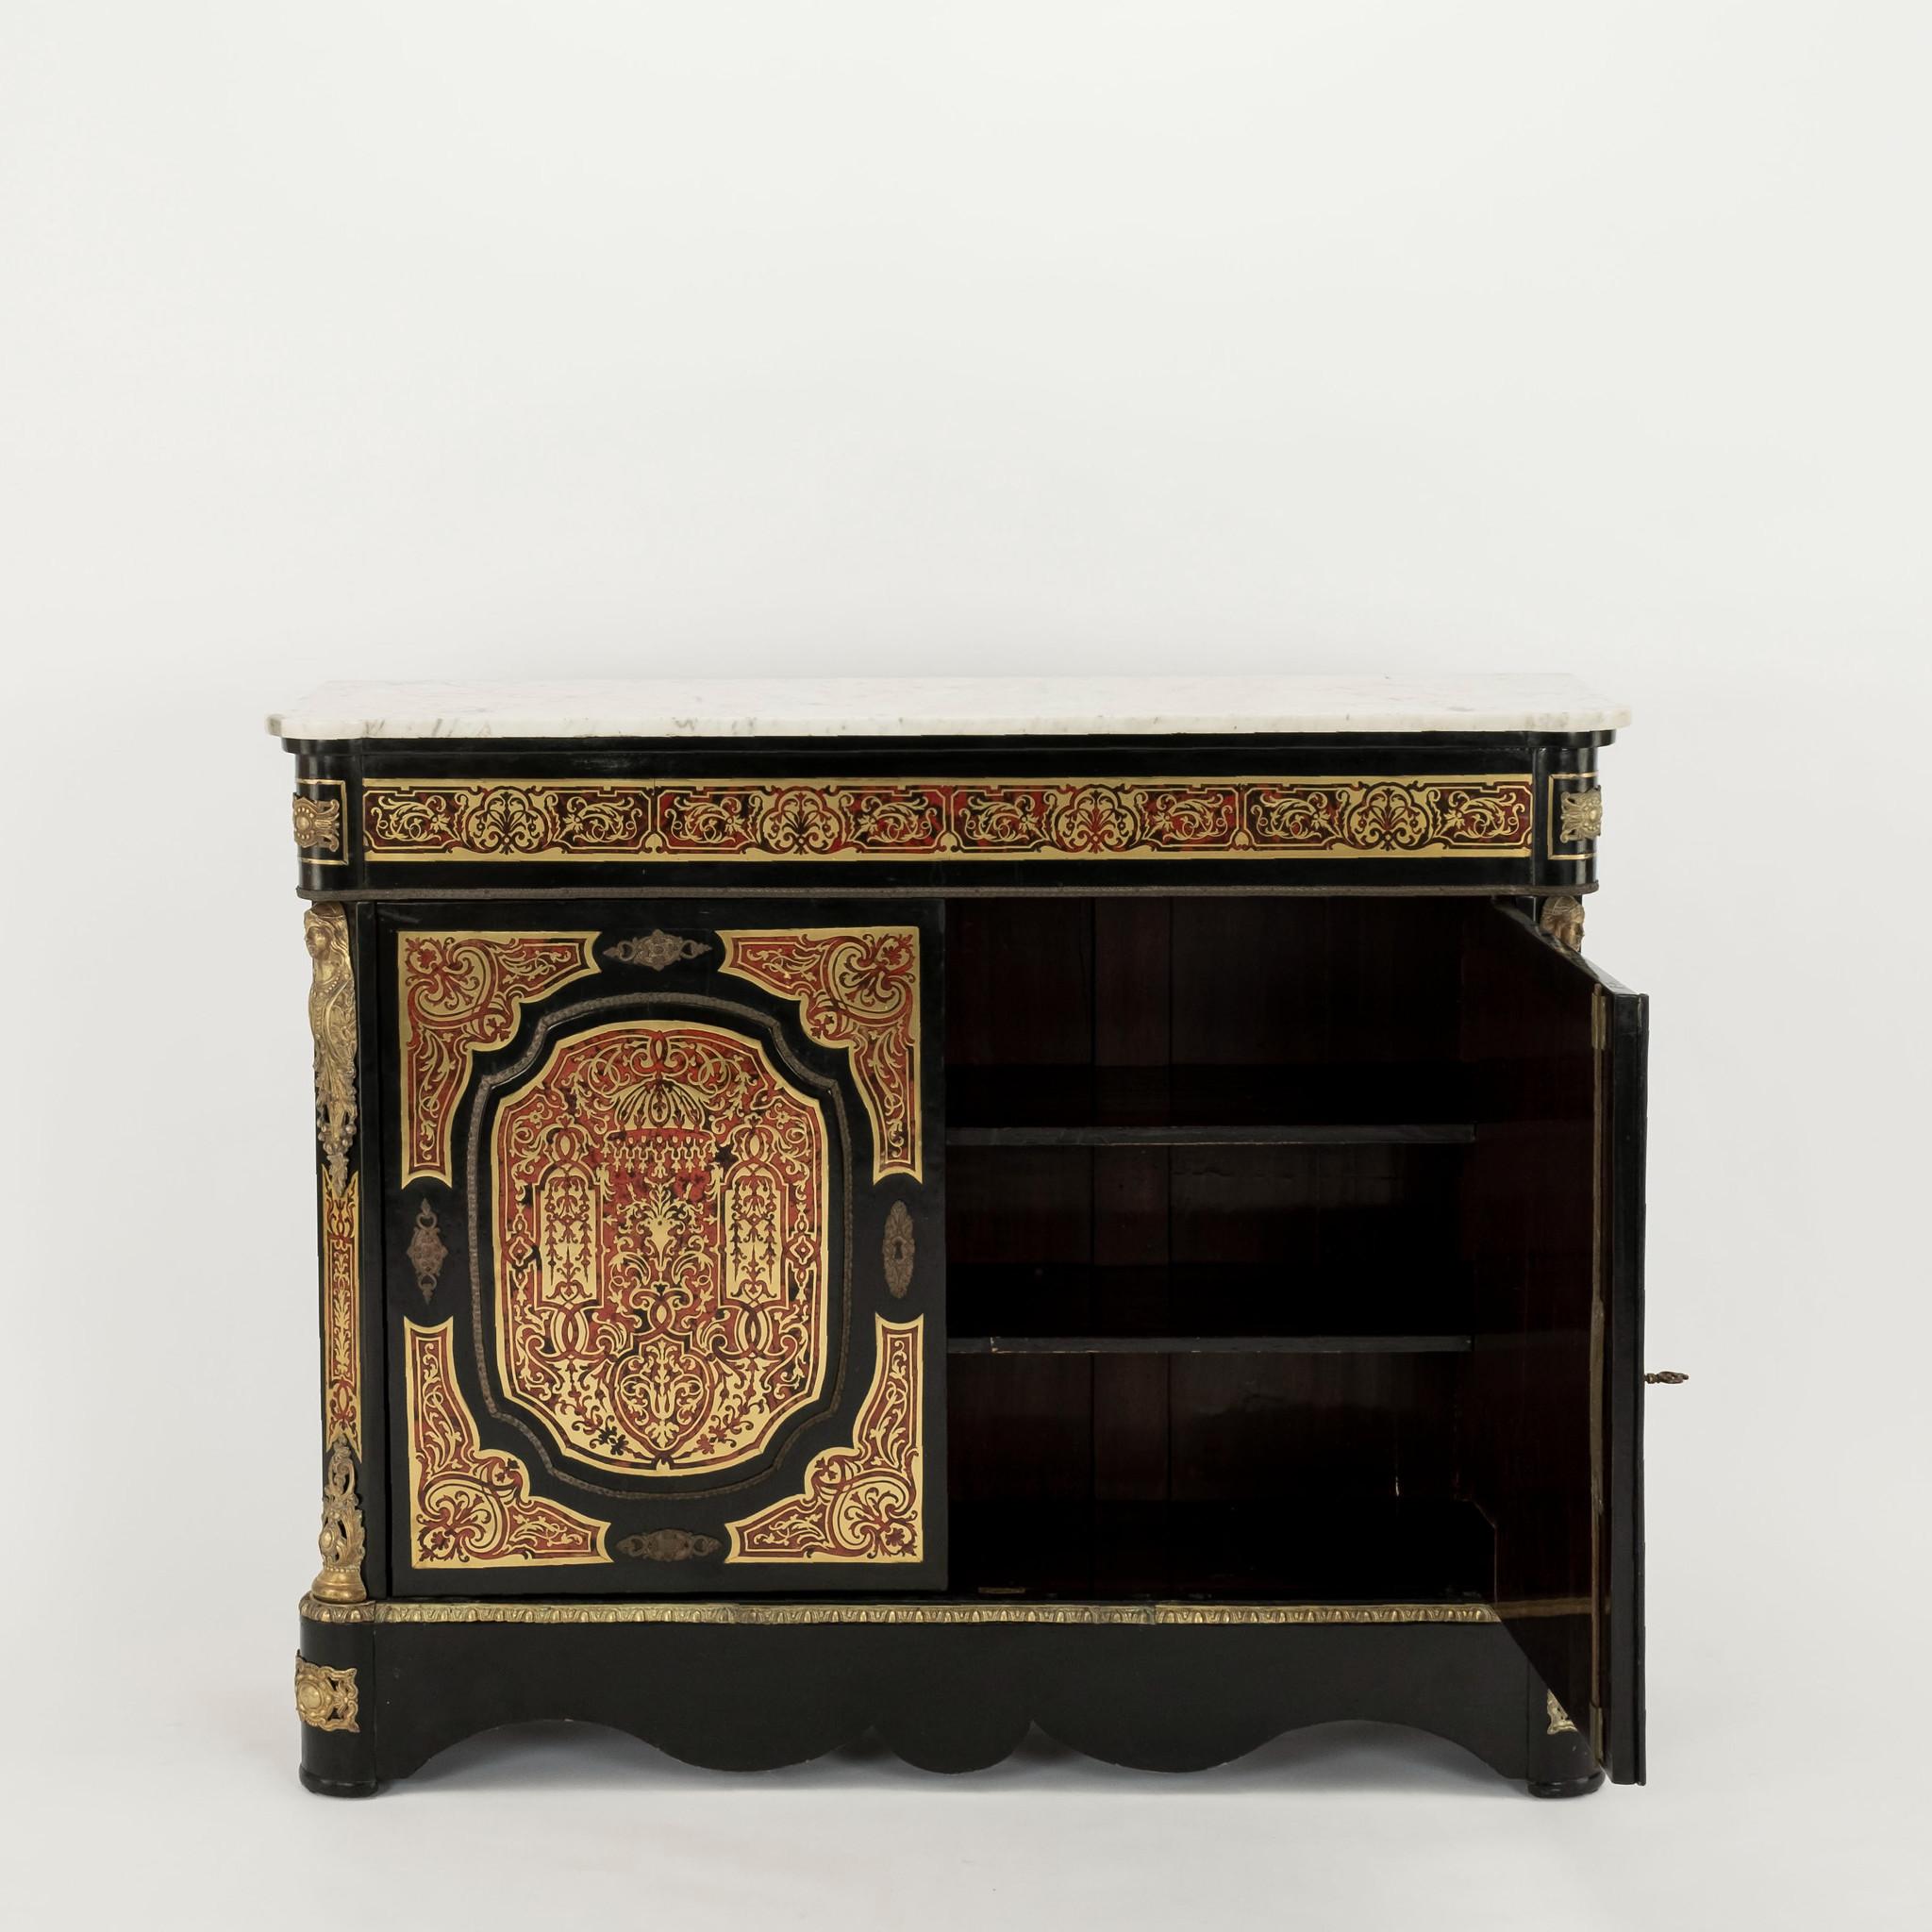 This French two door cabinet with marble top has an elaborate marquetry of tortoiseshell and brass. The decorations are complemented with brass moldings and appliqués.